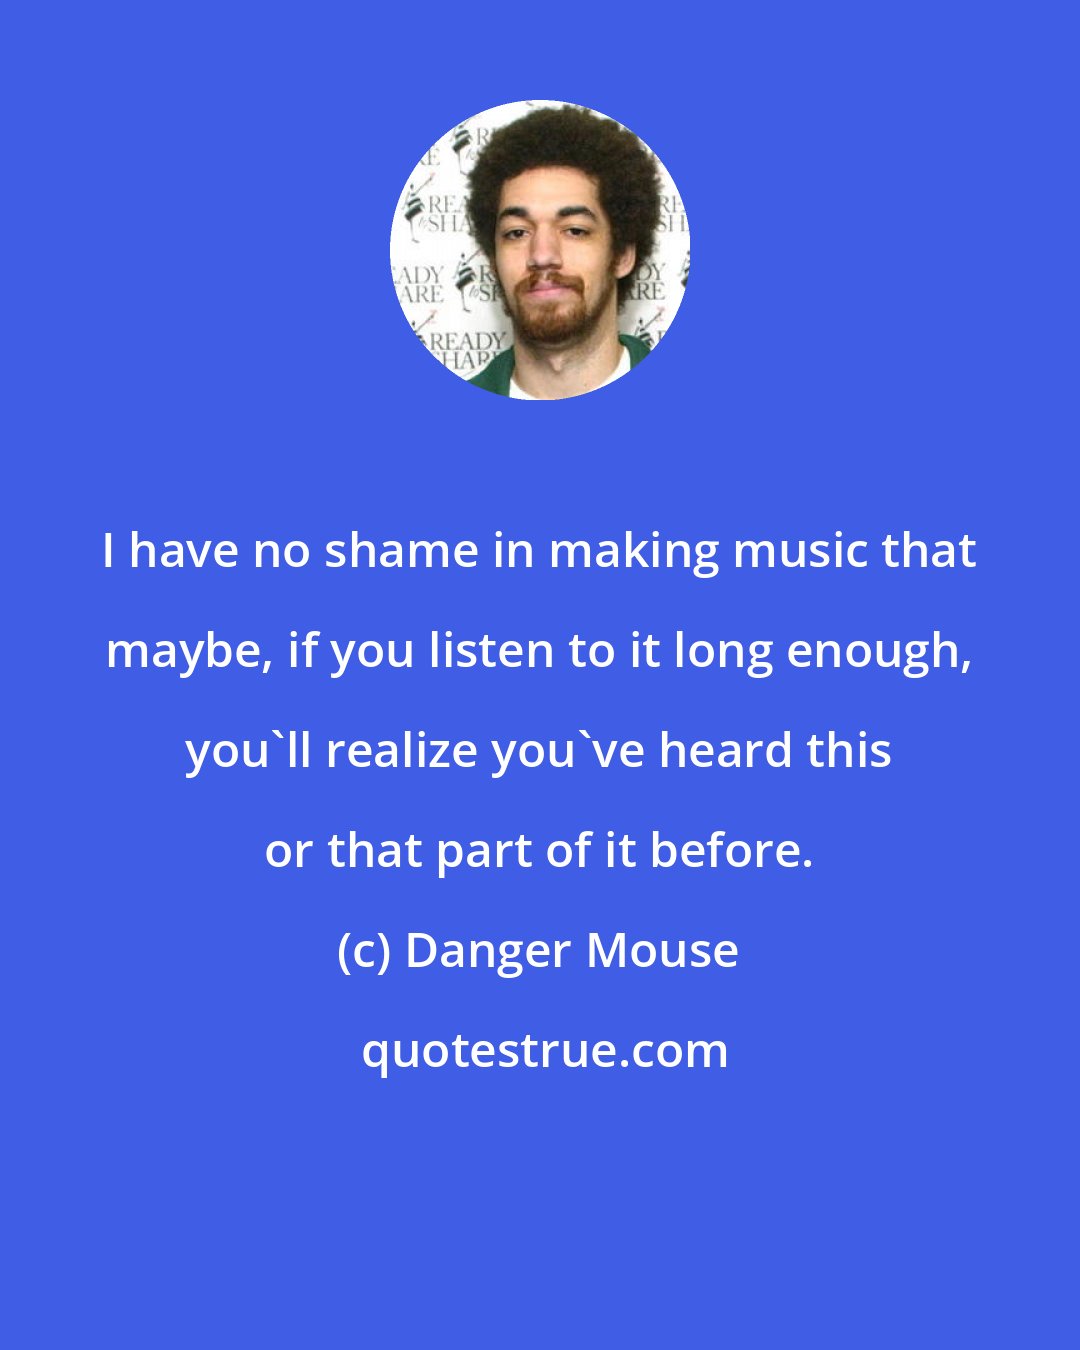 Danger Mouse: I have no shame in making music that maybe, if you listen to it long enough, you'll realize you've heard this or that part of it before.